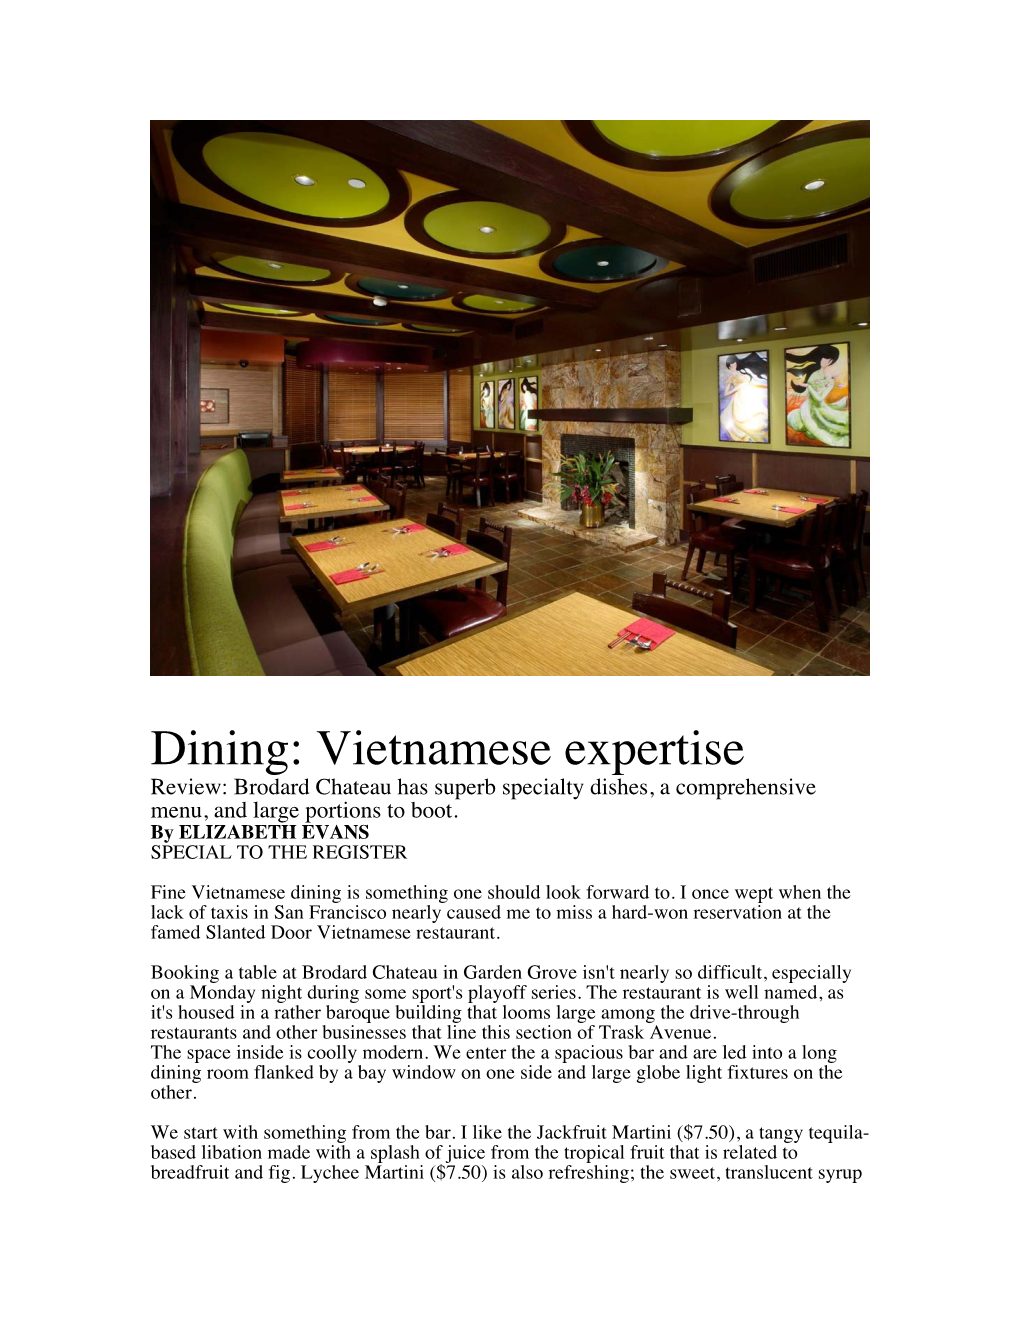 Dining: Vietnamese Expertise Review: Brodard Chateau Has Superb Specialty Dishes, a Comprehensive Menu, and Large Portions to Boot